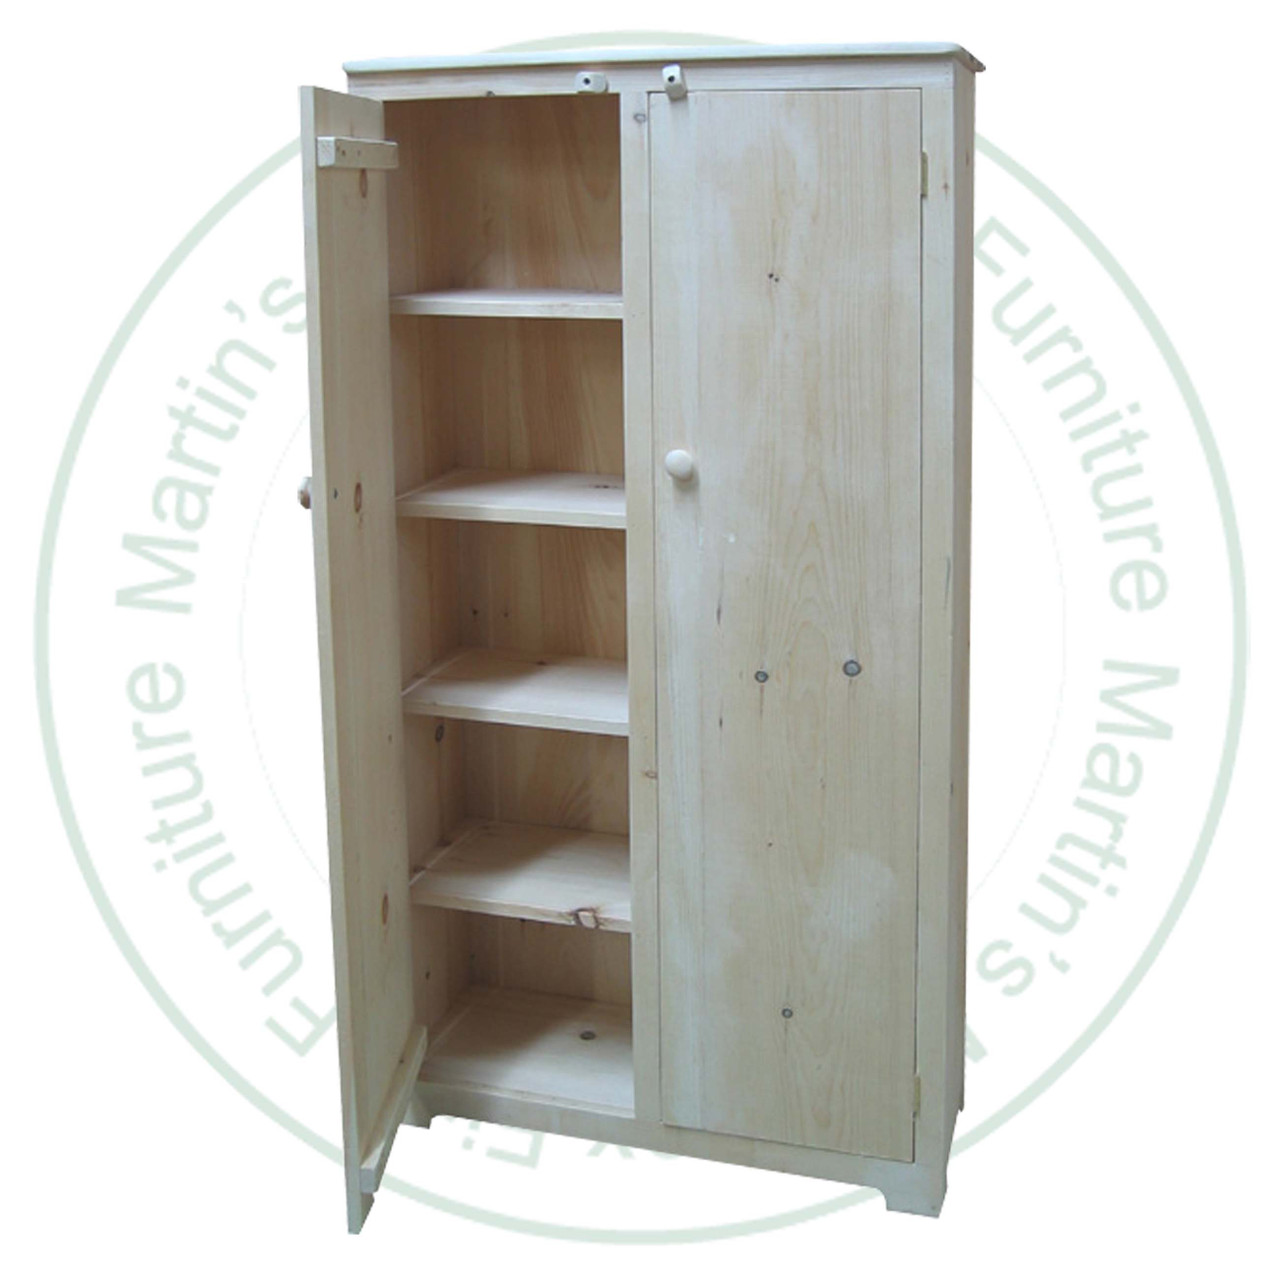 Maple Nith River Jam Cupboard 12''D x 22''W x 72''H With 2 Doors